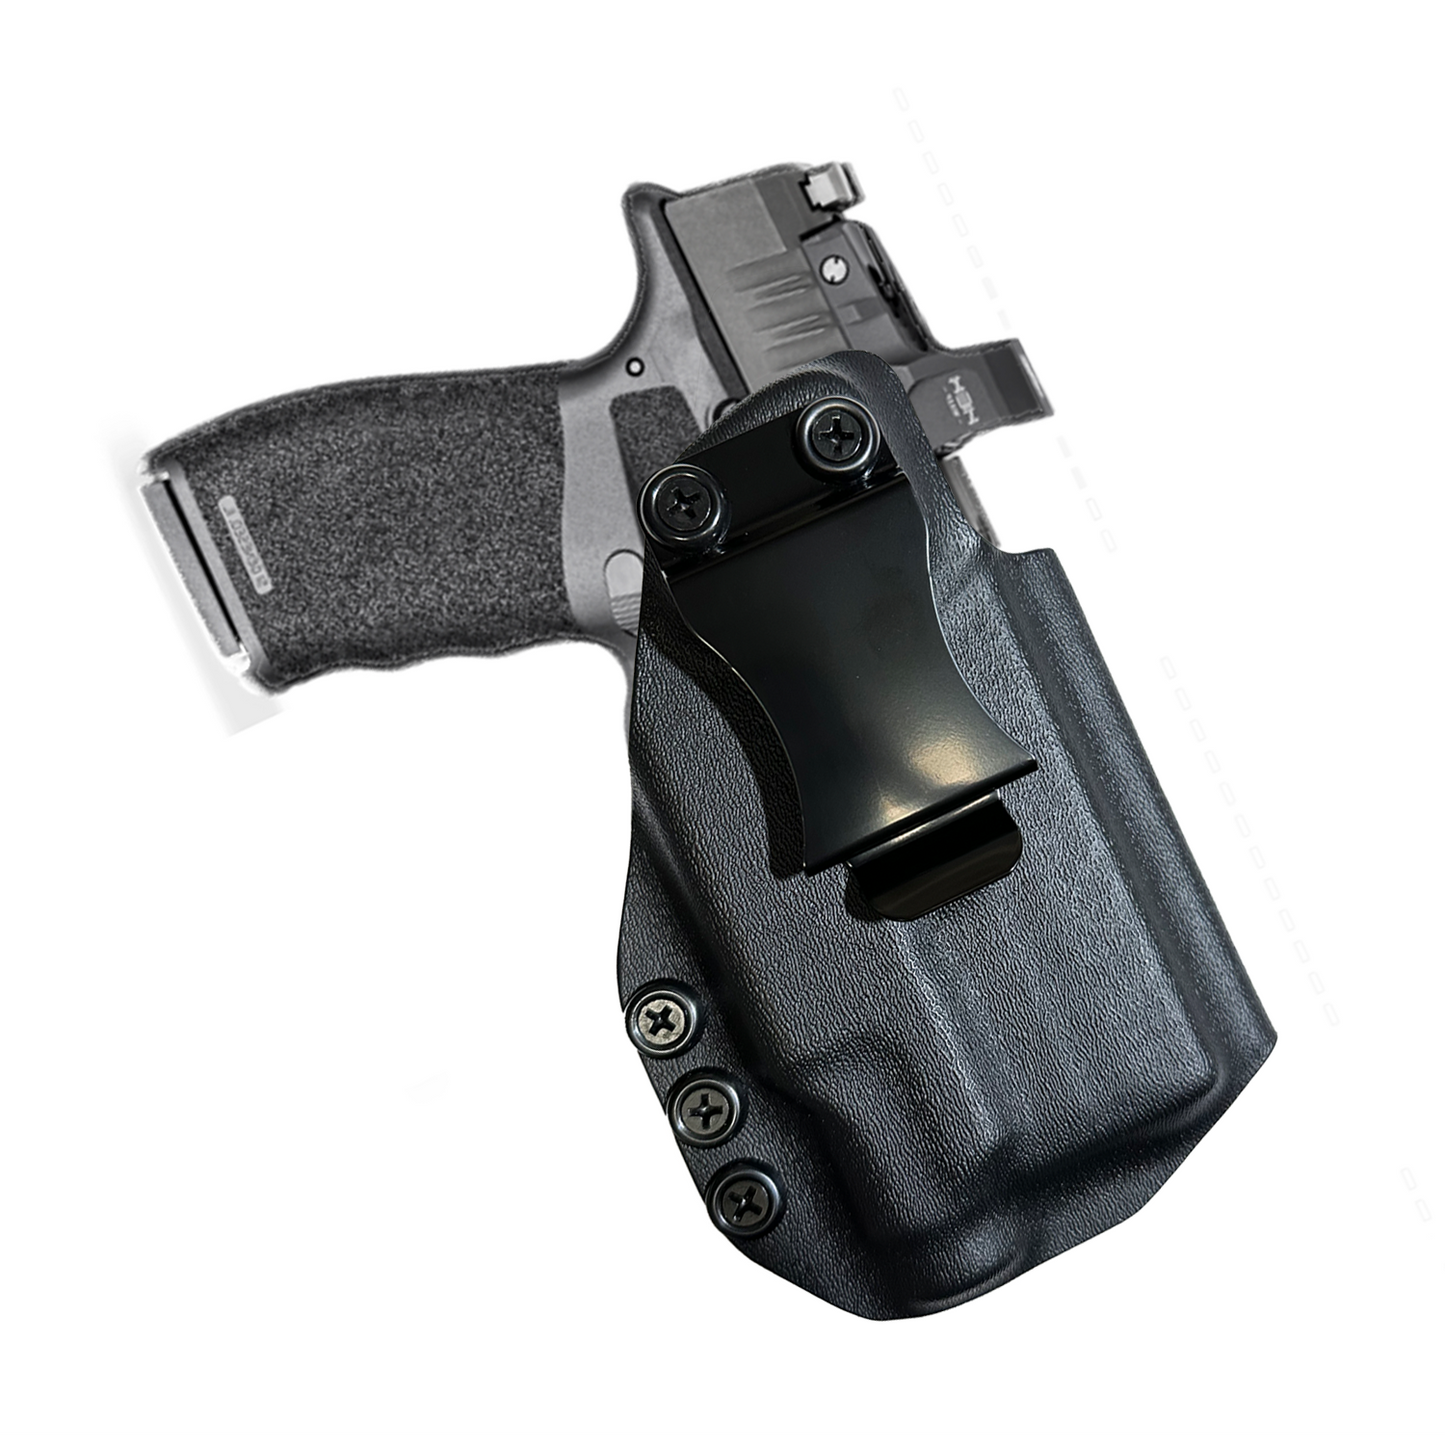 GLOCK 48 With TLR7-SUB Light IWB (Inside The Waistband Holster)